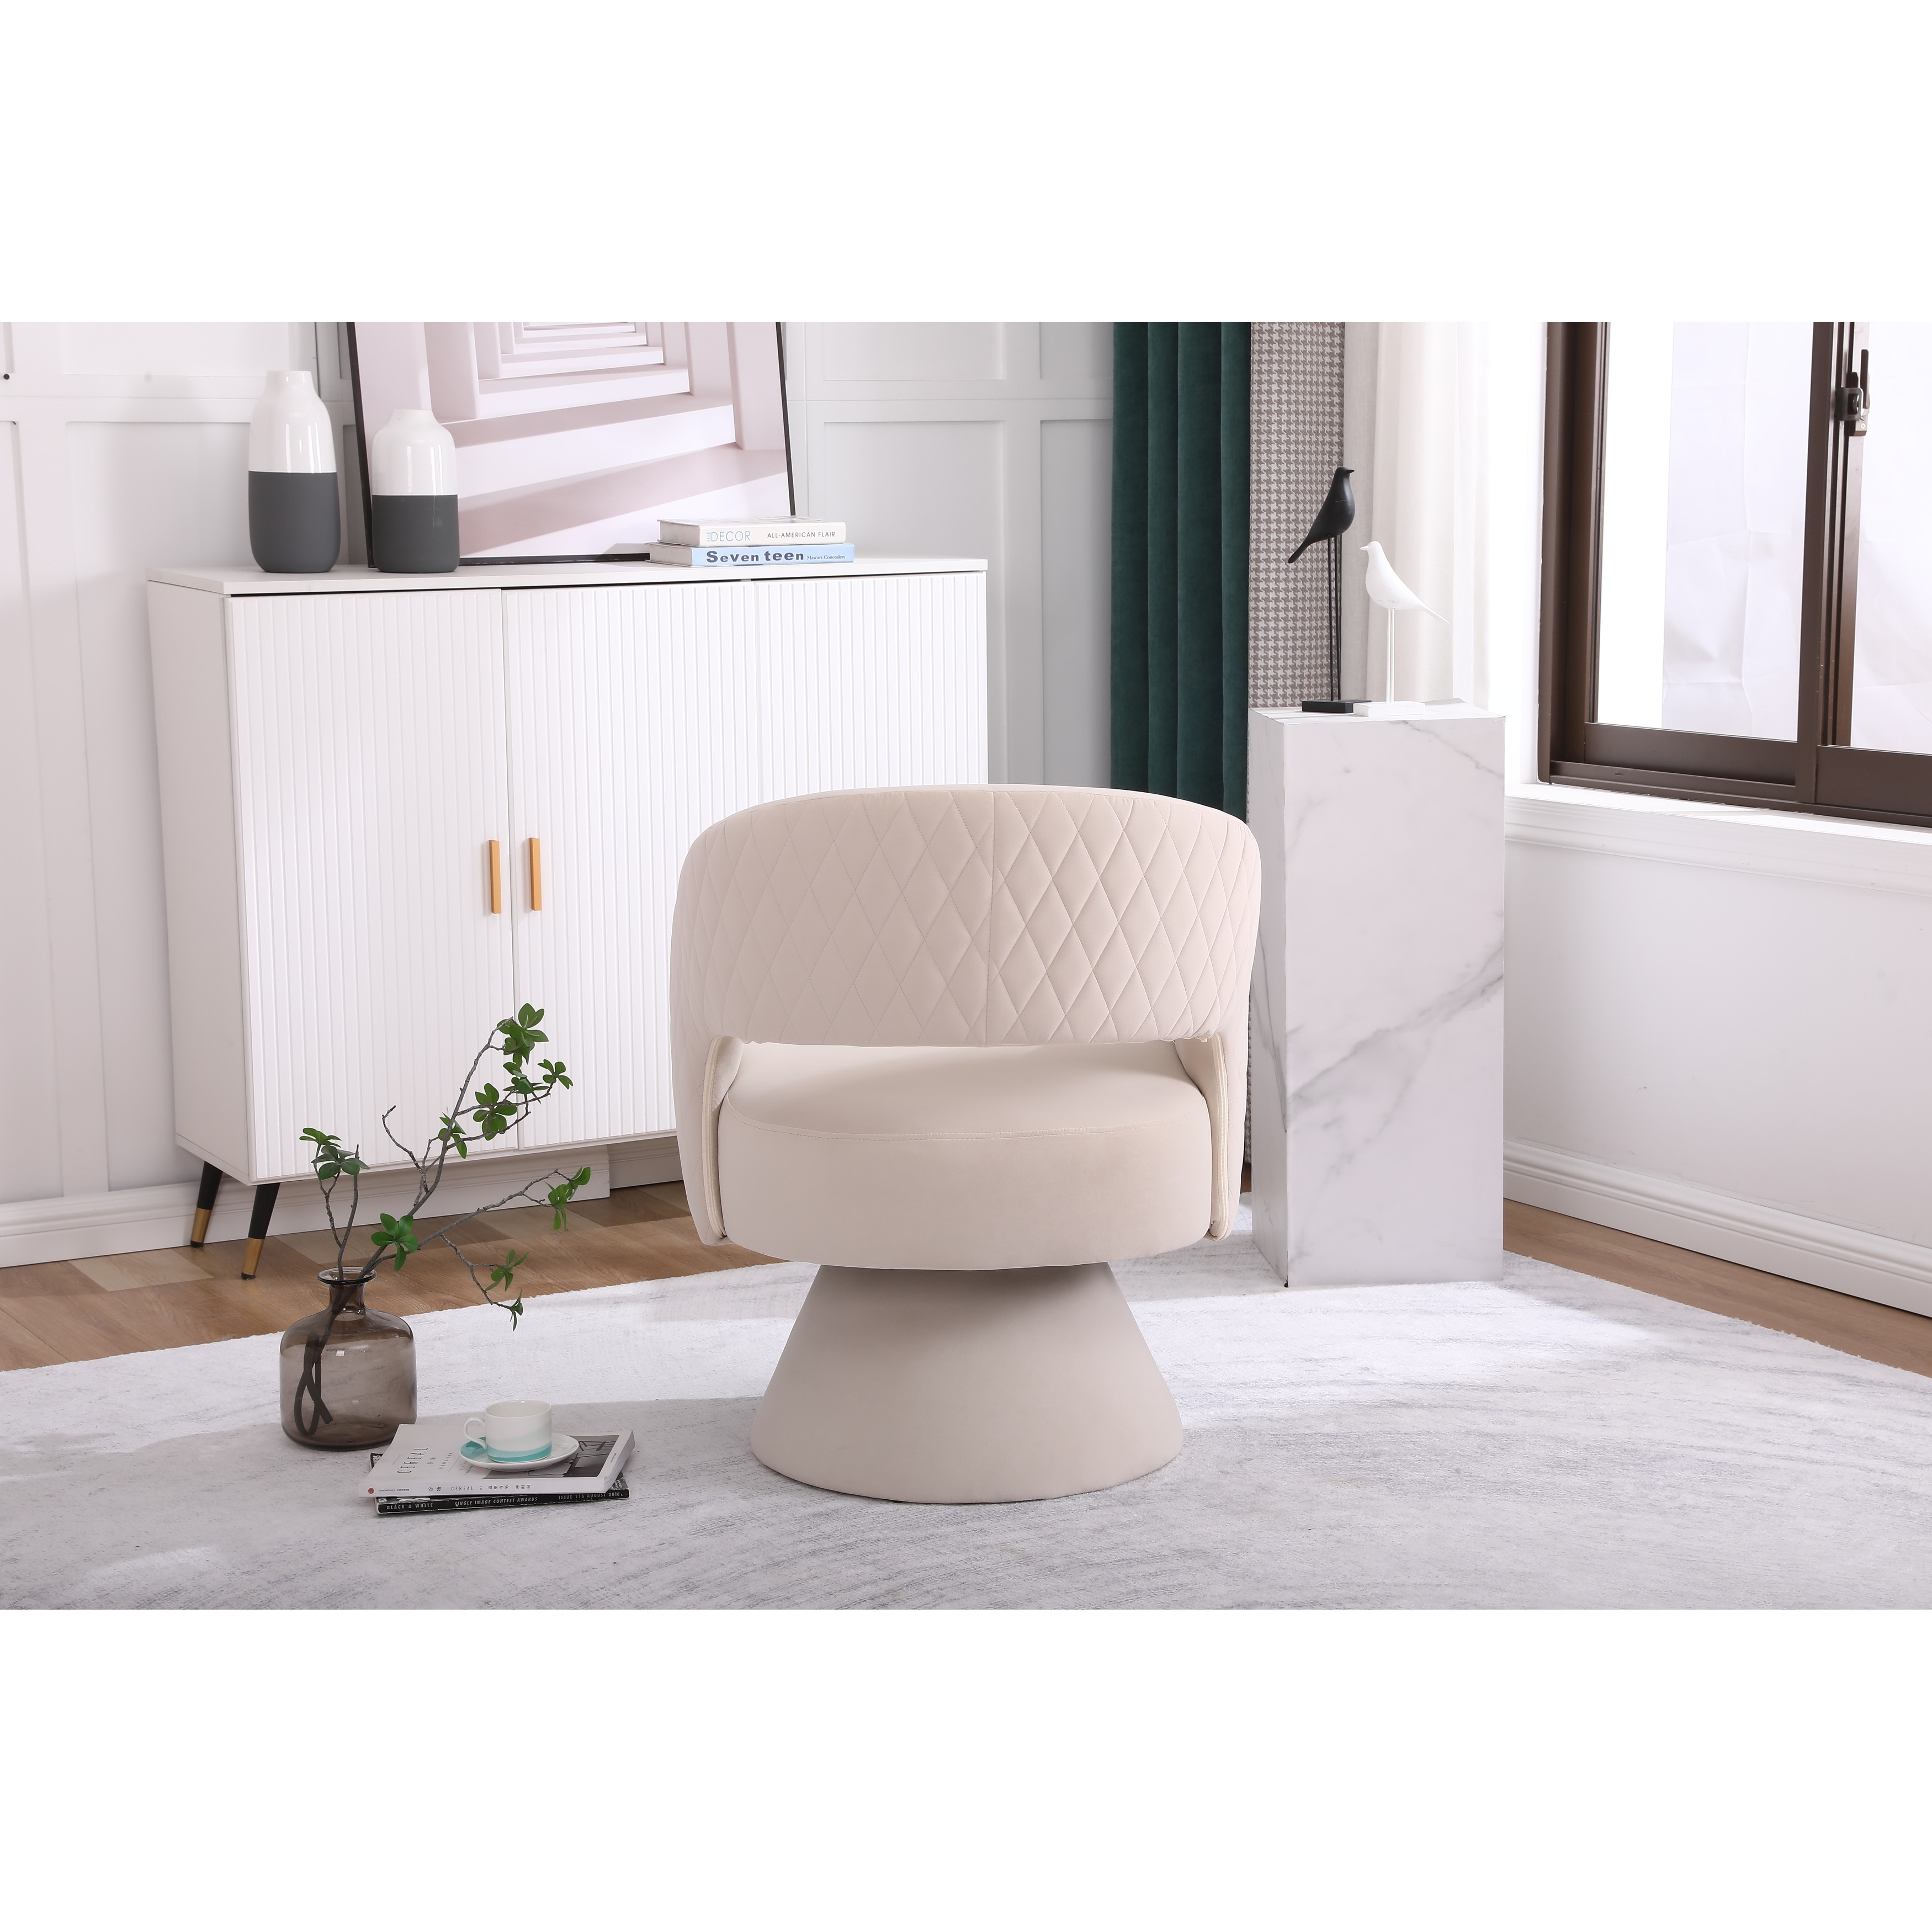 Swivel Accent Chair, Modern Round Barrel Chairs with Open Back, Comfy Fabric Living Room Chairs for Bedroom Office